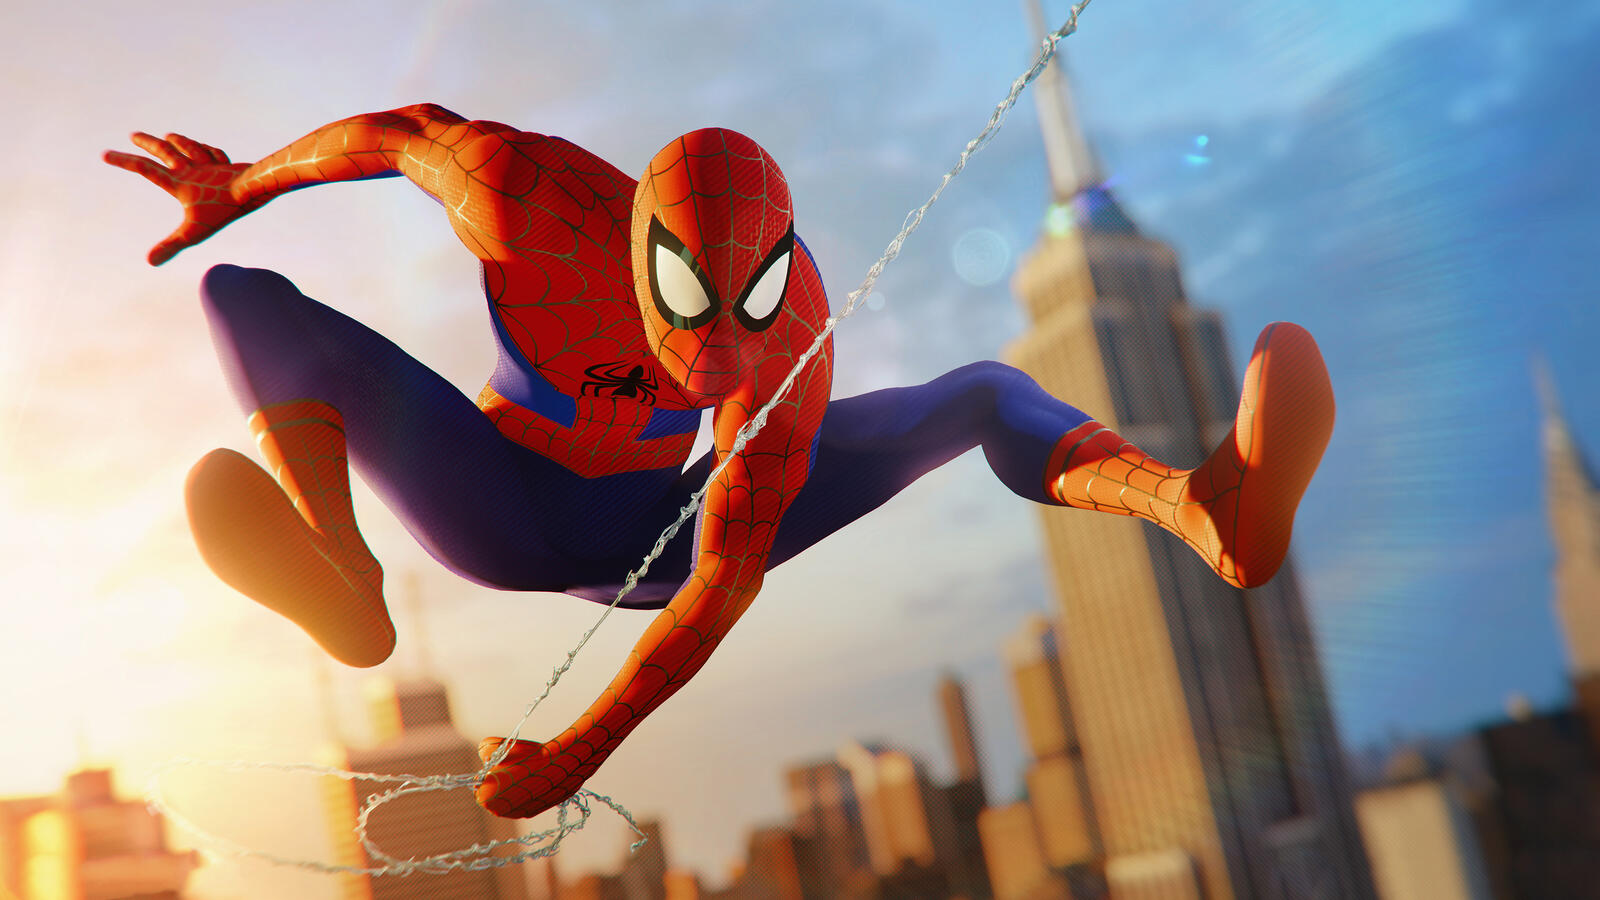 Wallpapers PS4 games artist spiderman into the spider verse on the desktop